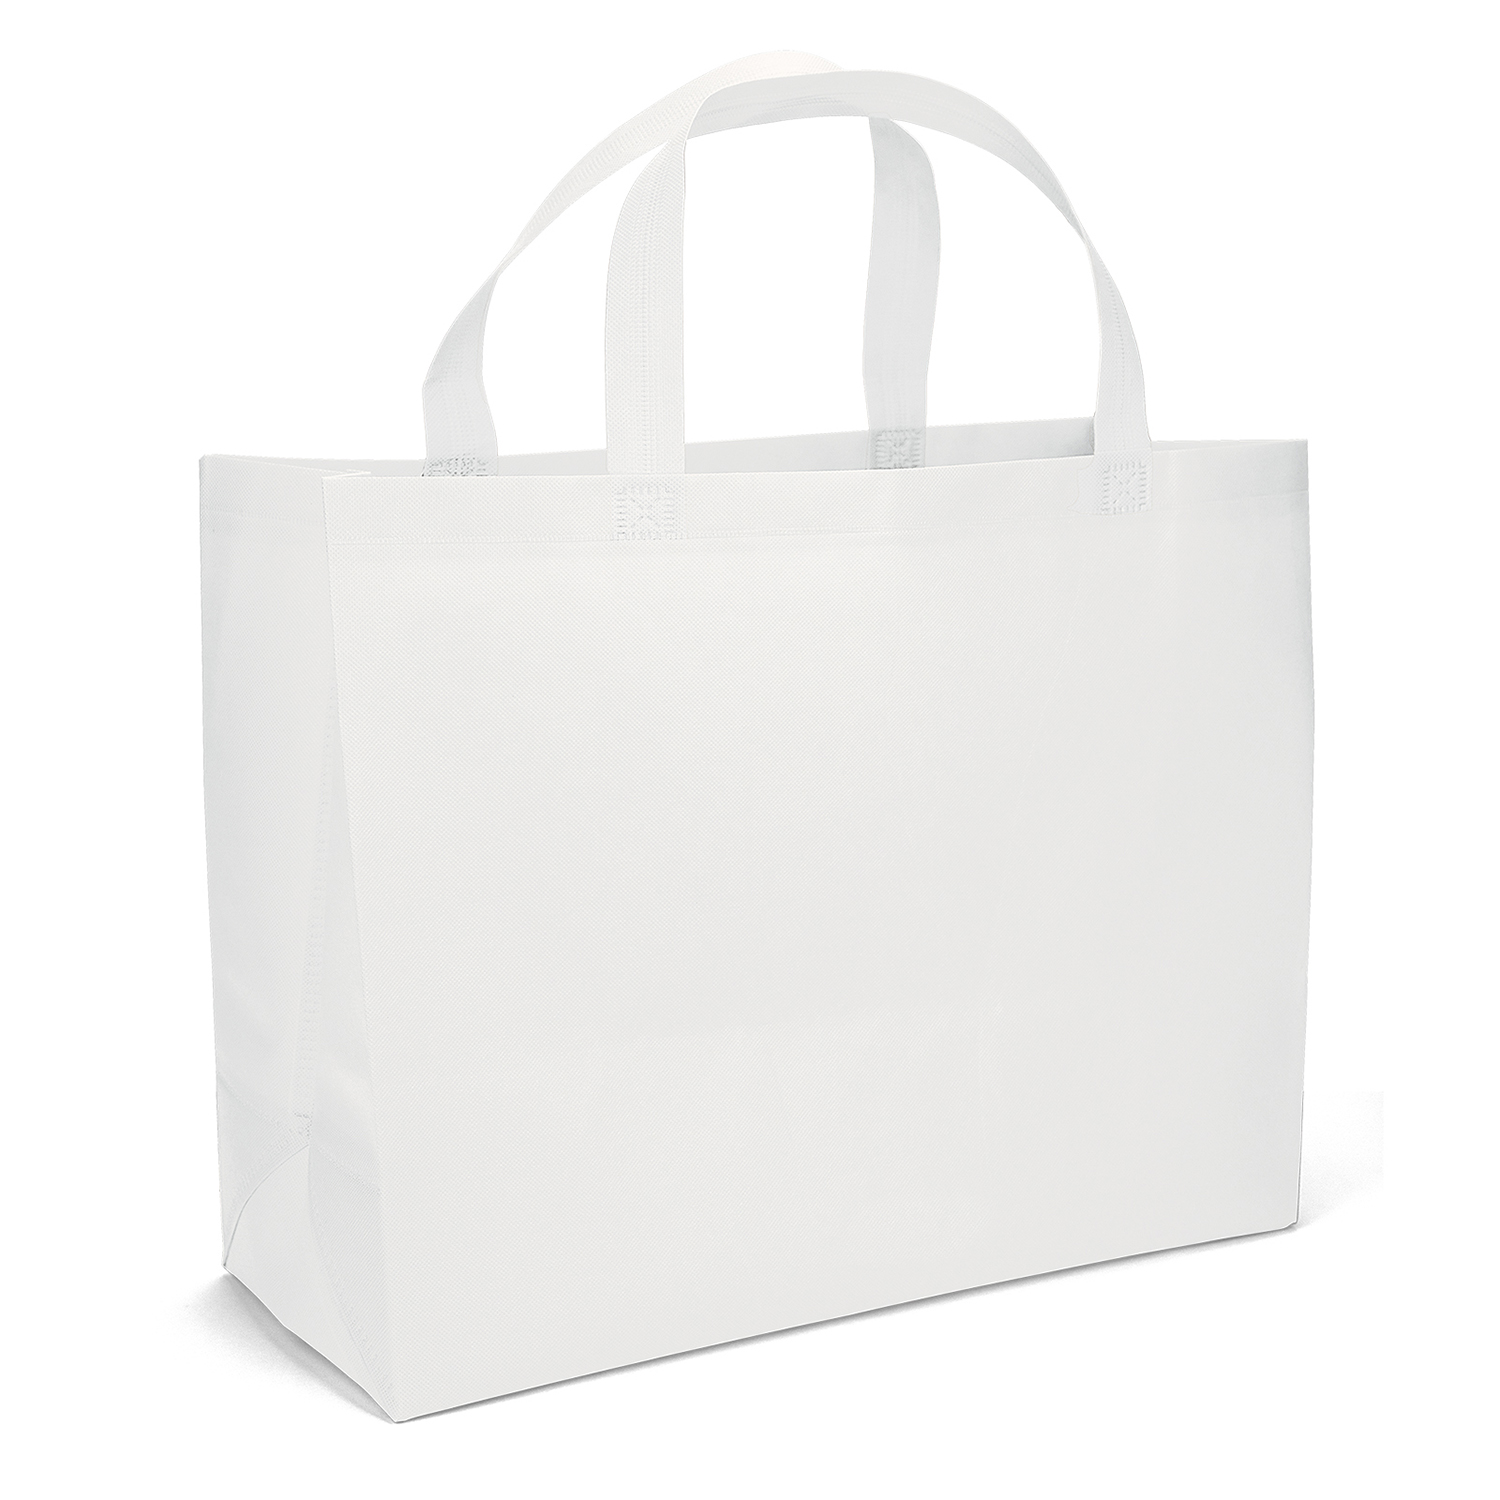 Bag Makers DYSV218 - Custom Printed Eco-Friendly Promotional Non-Woven Grocery Tote Bag